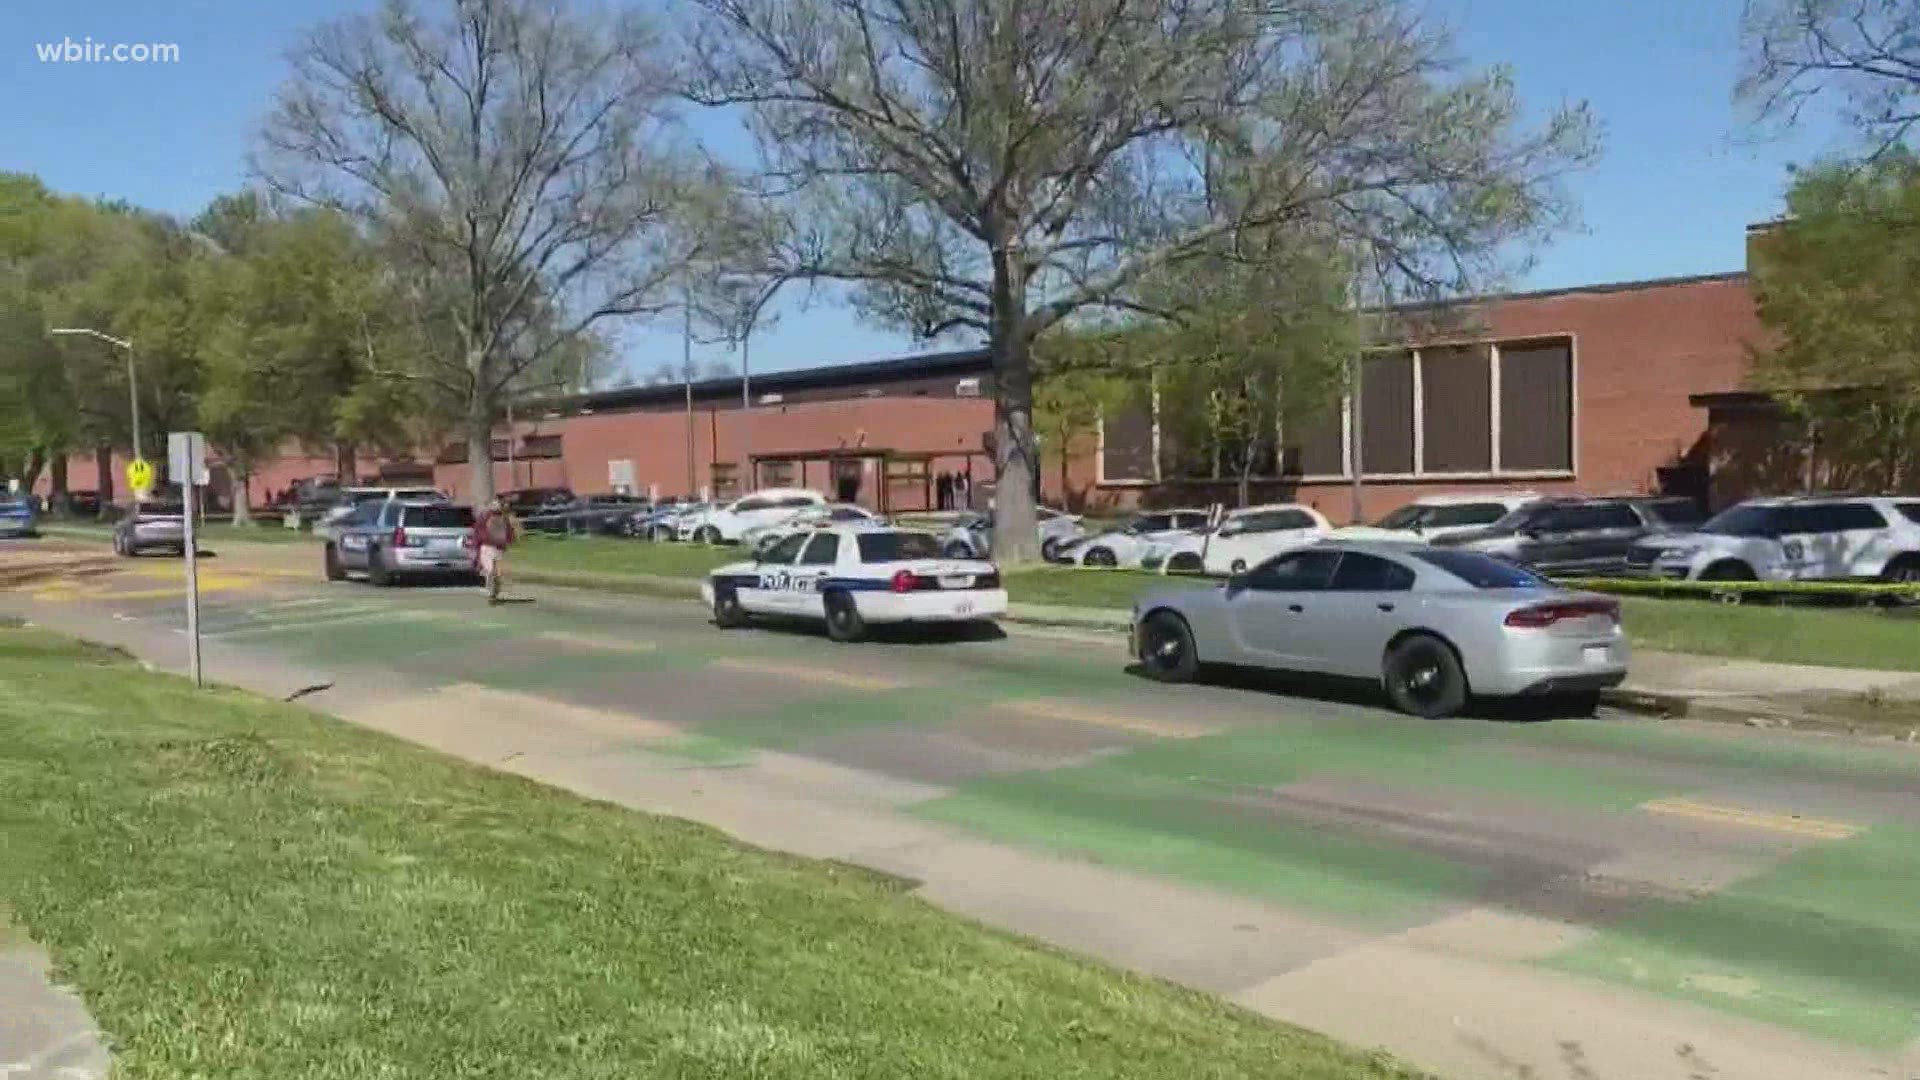 The shooting at the East Knoxville high school left an officer wounded and the suspect dead, who the TBI said was a student.